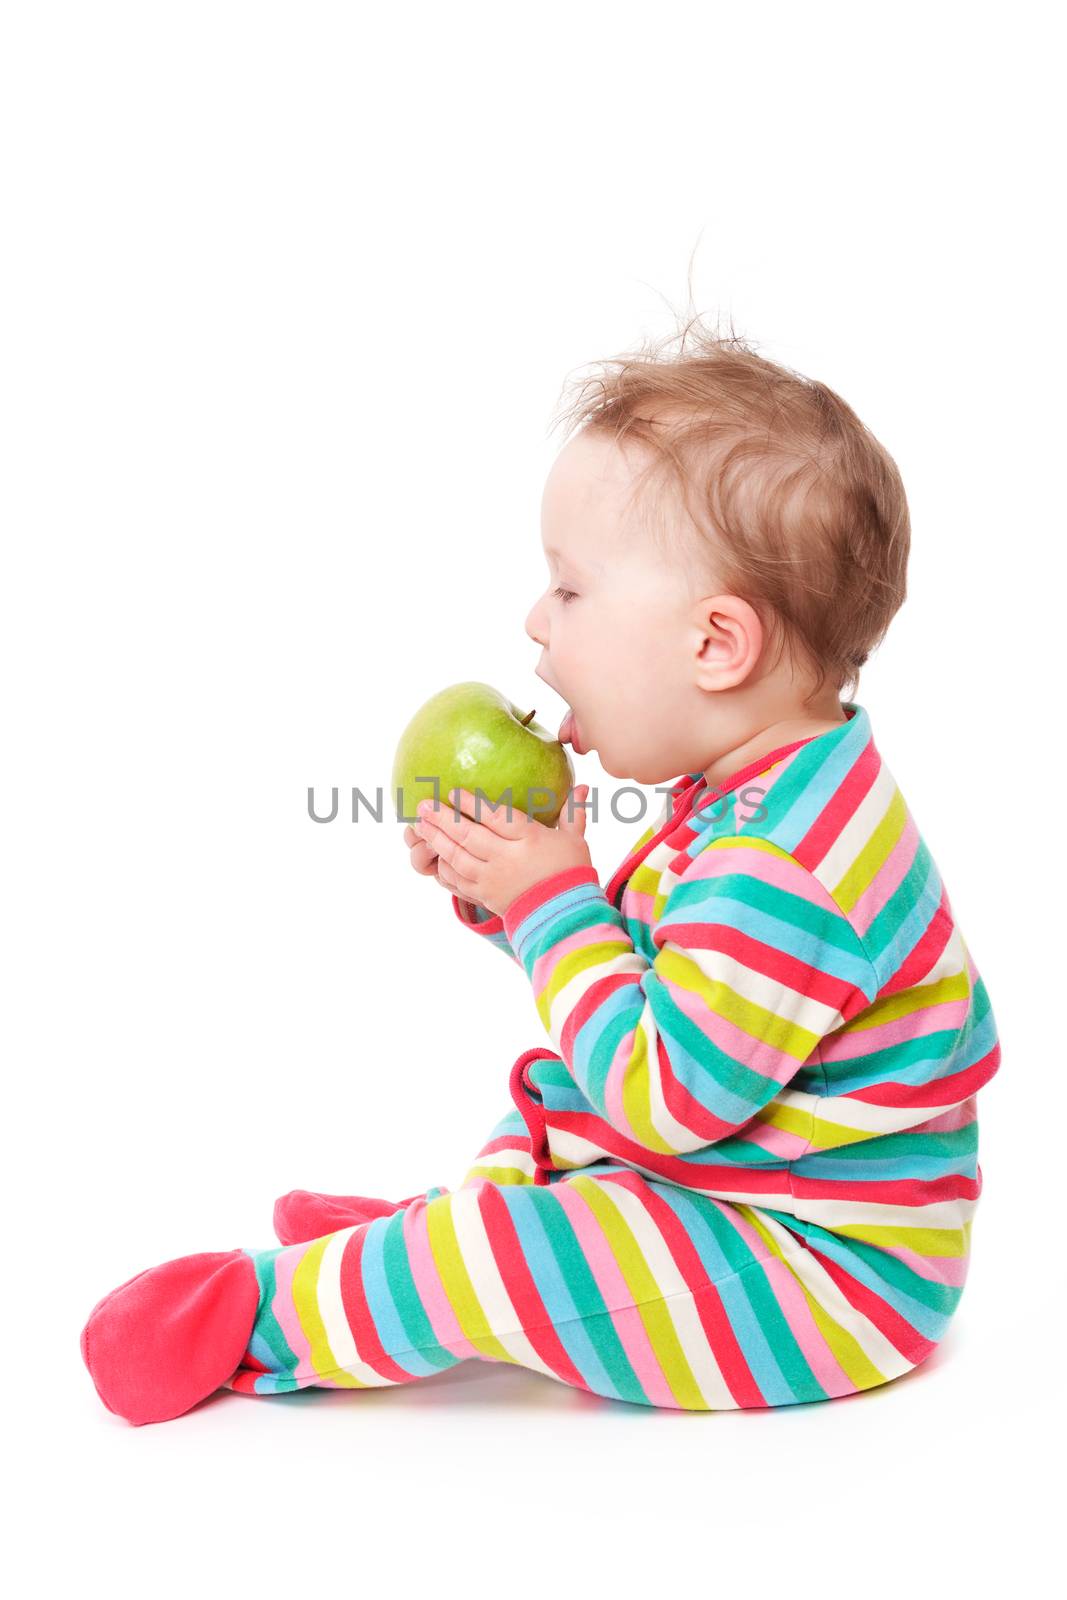 10 month old baby sitting and eating green apple isolated on white background. First teeth concept.